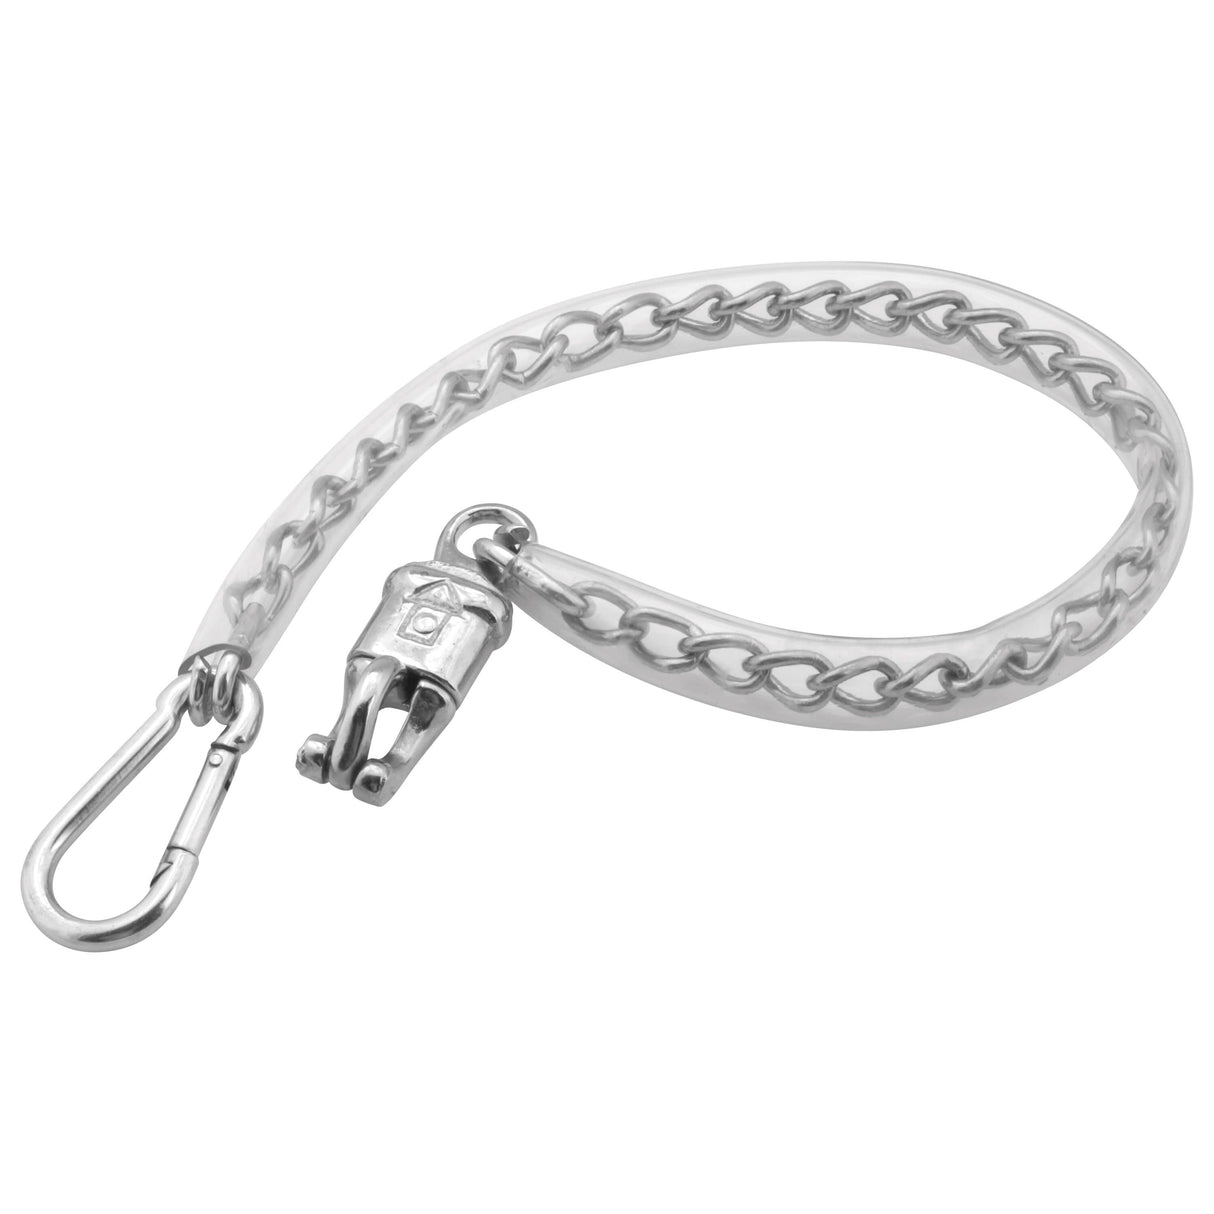 Imperial Riding Trailer Chain With Synthetic Cover